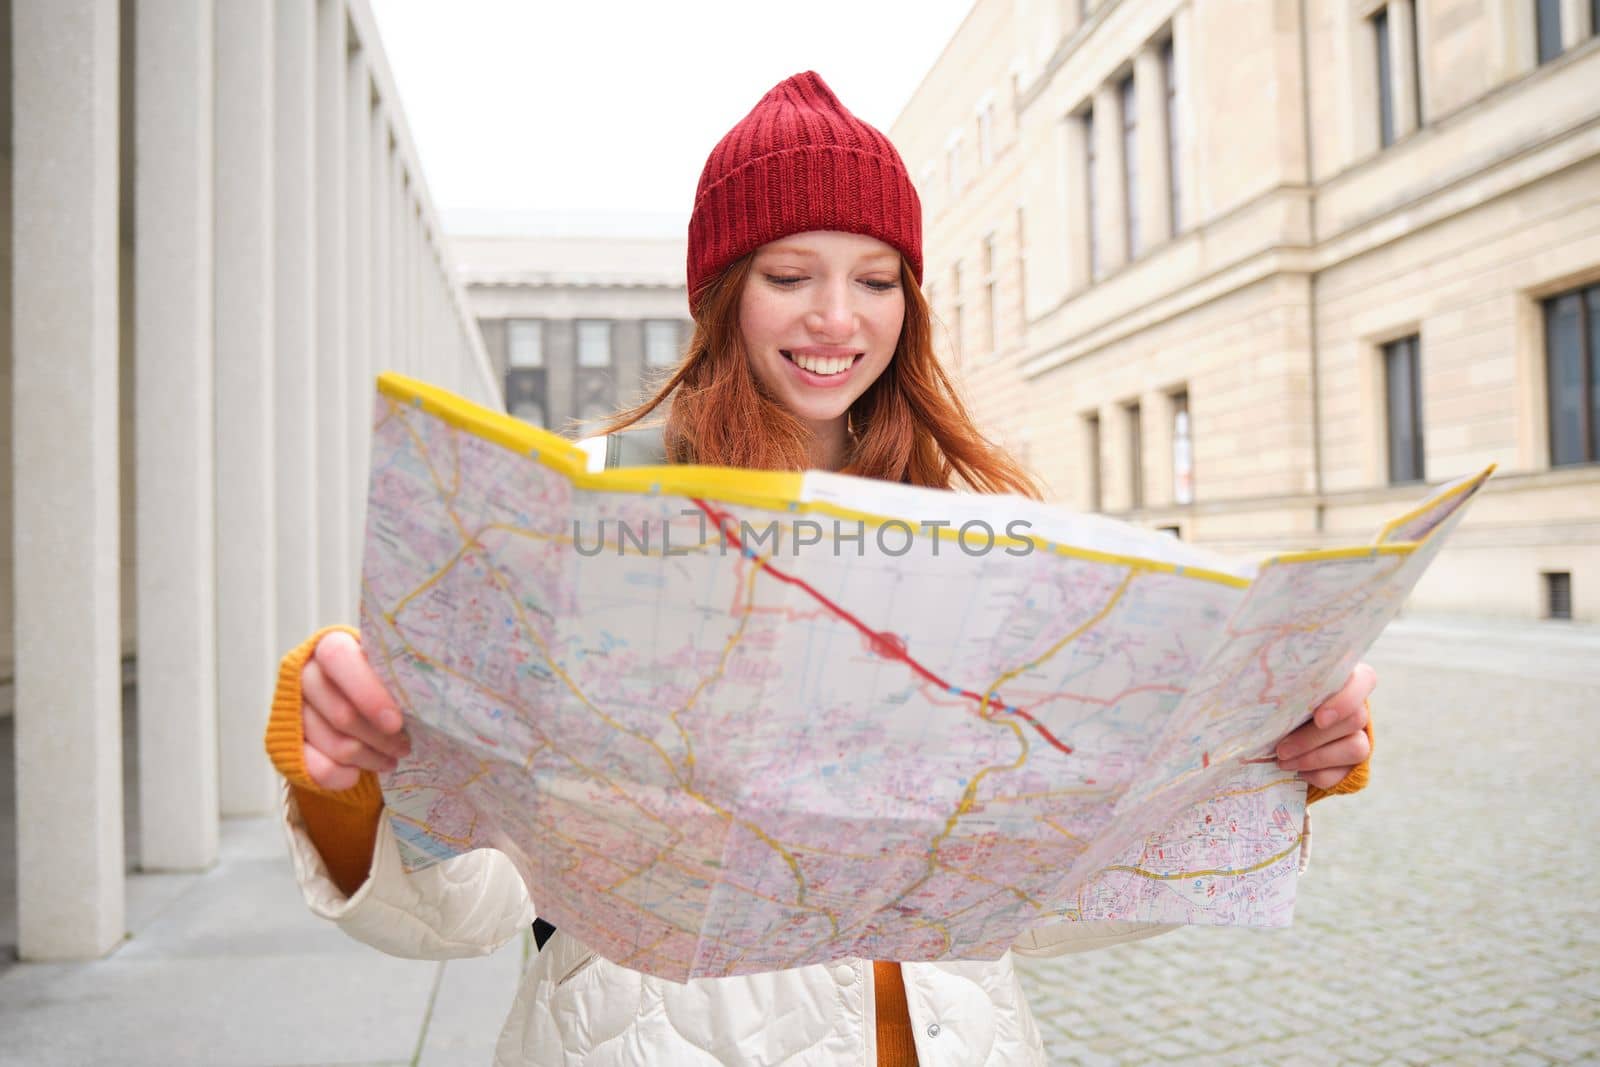 Redhead girl, tourist explores city, looks at paper map to find way for historical landmarks, woman on her trip around euope searches for sightseeing.